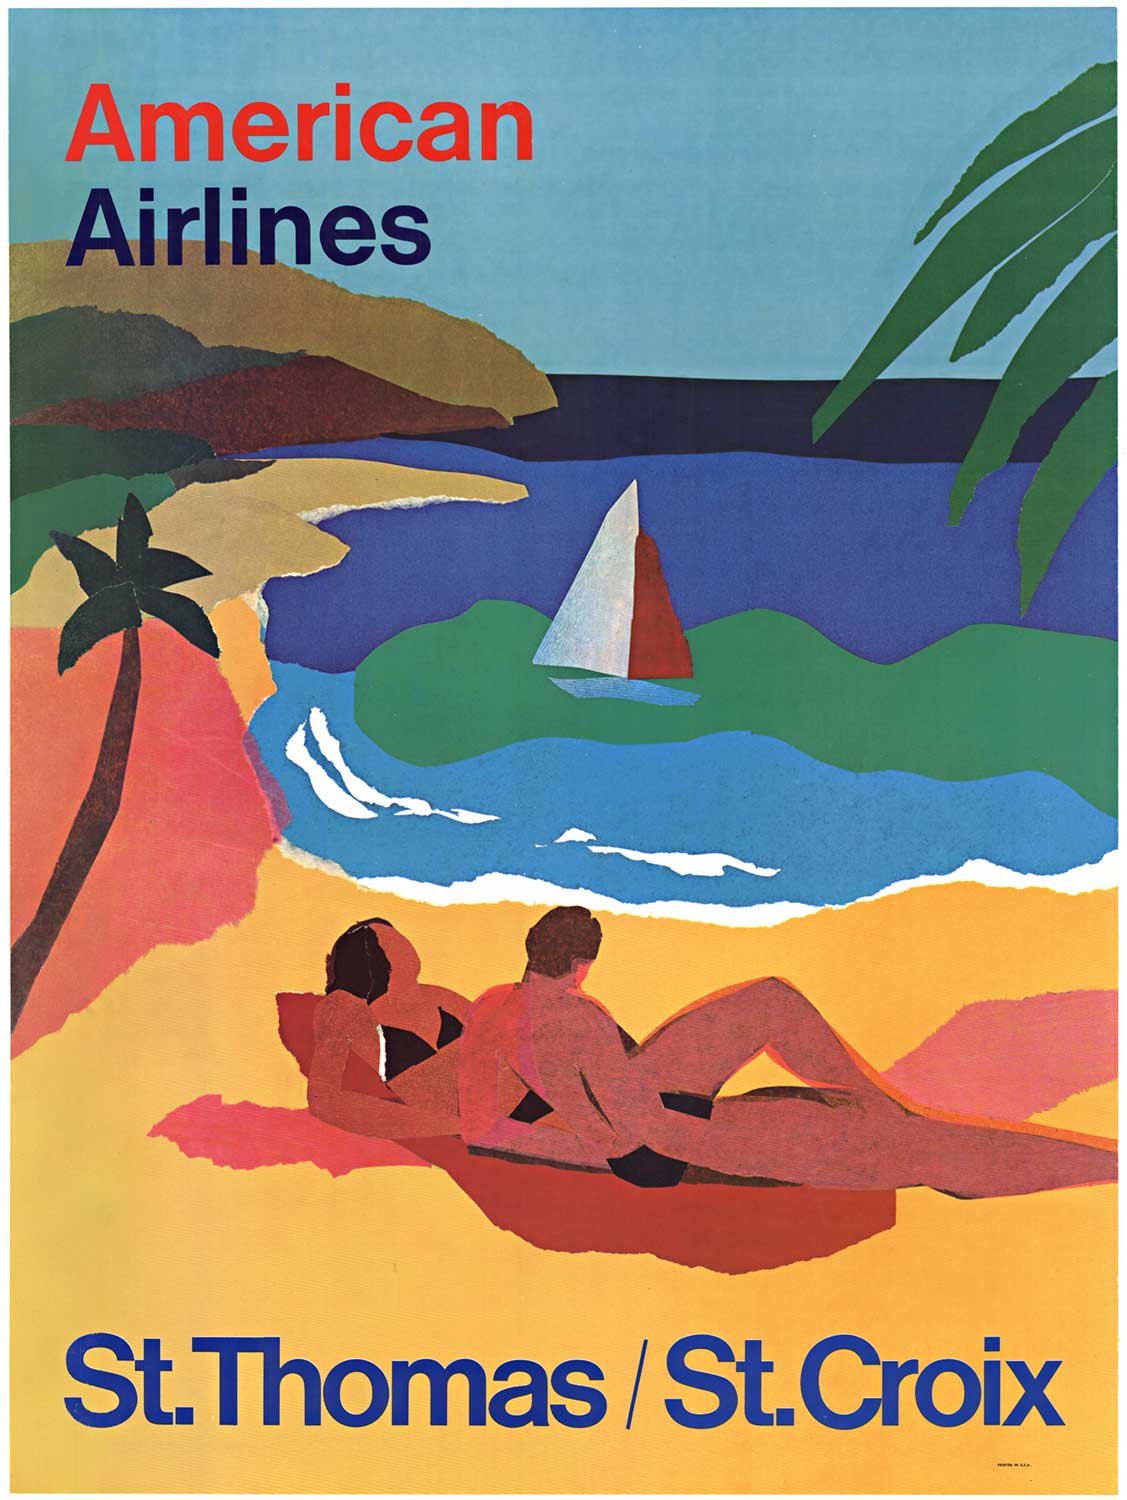 Original American Airlines St. Thomas / St. Croix vintage trave poster. Archival linen backed in very good condition, ready to frame. Later edition of the poster would be created and be called “Endless Summer” series of travel posters.